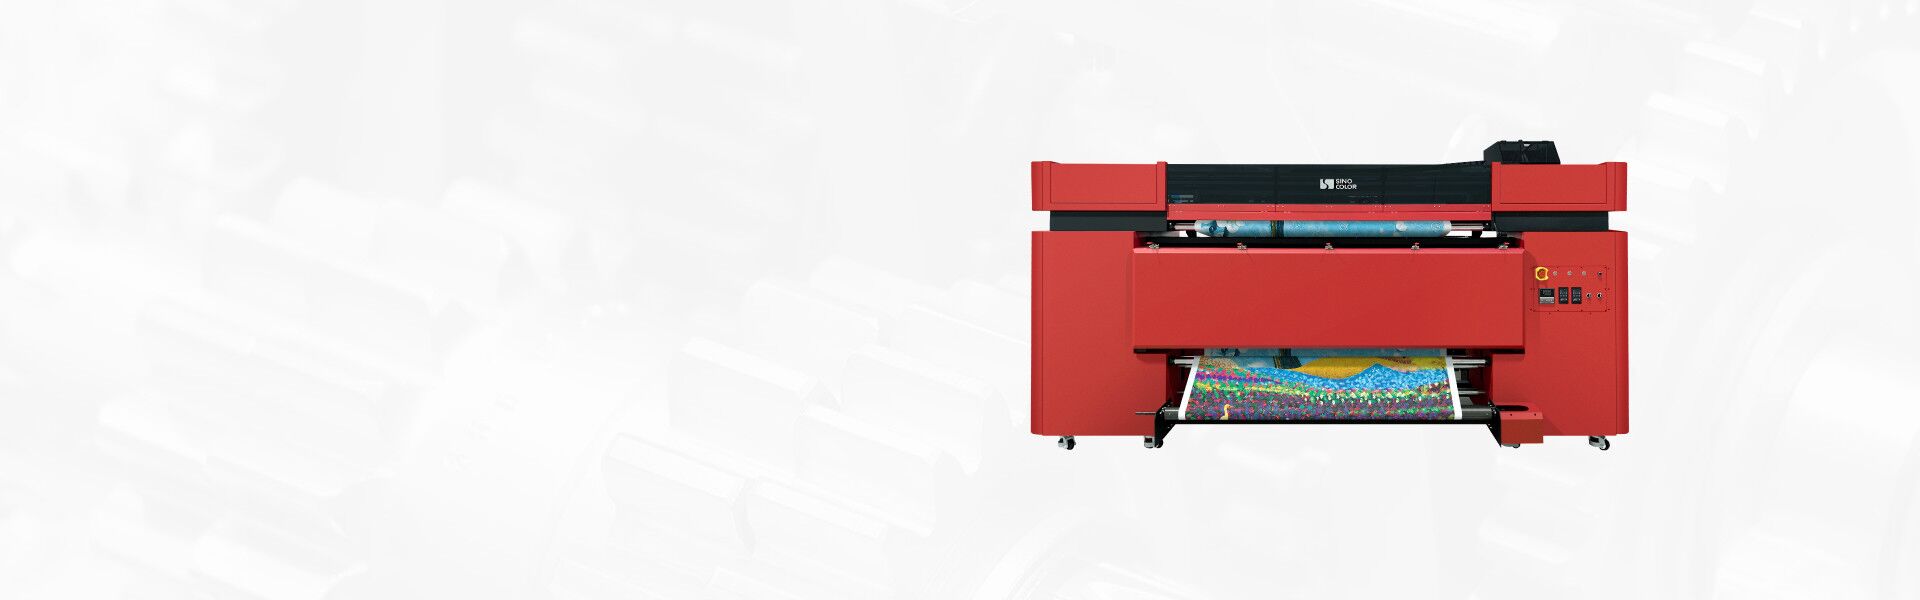 https://www.sinocolordg.com/products/textile-printer/direct-polyester-cotton-printer/direct-polyester-printer-fp-740s.html images